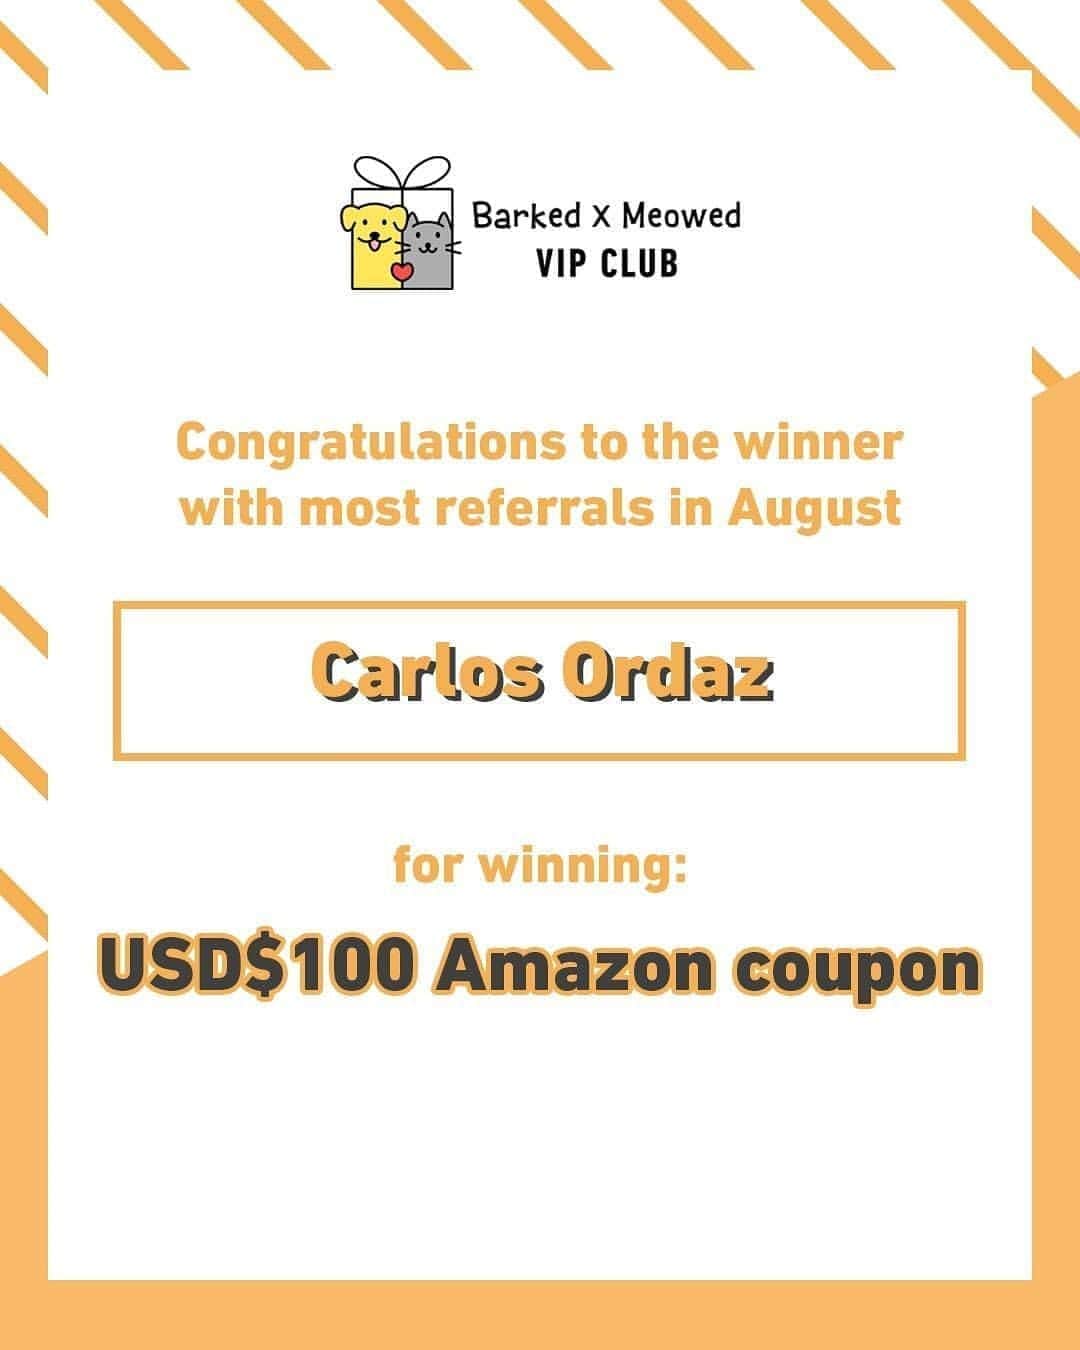 Aww Clubさんのインスタグラム写真 - (Aww ClubInstagram)「Congratulations to Gemma Kass and Jedrzej Dlugiewicz for winning the Barked X Meowed VIP Club August new member rewards - USD$100 Amazon coupon! Thank you Carlos Ordaz for referring the most new members in August and you win a USD$100 Amazon coupon too! . 🎁Tap link in bio to join the “Barked X Meowed VIP Club” for FREE now! . Monthly rewards are waiting for you and you might be the next one to win USD$100! 😎 Refer your friends to join for a chance to win an extra $100 Amazon Gift Card! - #meowed @barked #BarkedMeowedVIP #membership #reward #gift #cat #catdad #catmom #catlover #dog」9月24日 20時16分 - meowed